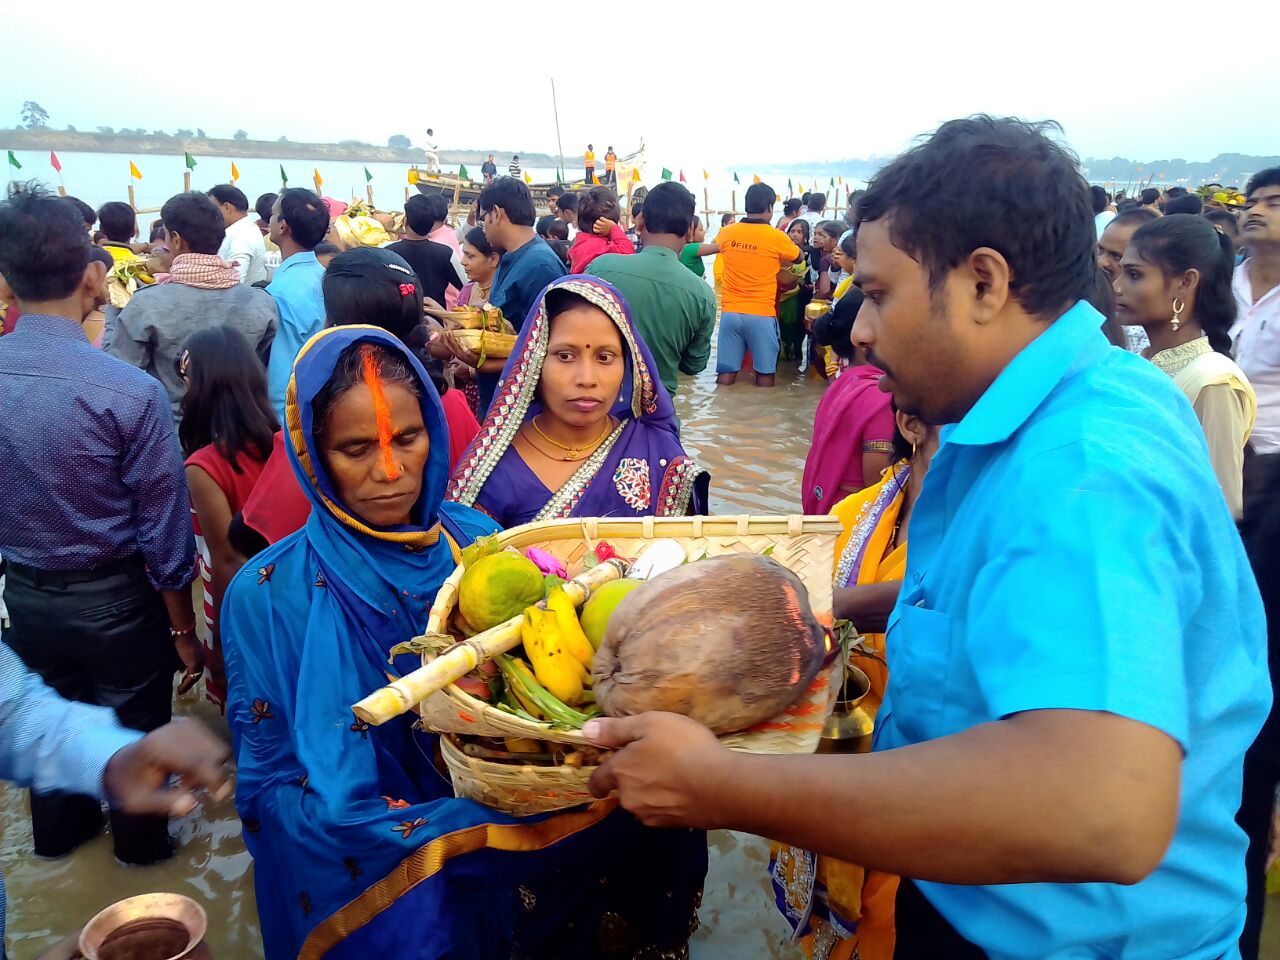 CHHATHH SPREADS MESSAGE OF HUMANITY FROM BIHAR